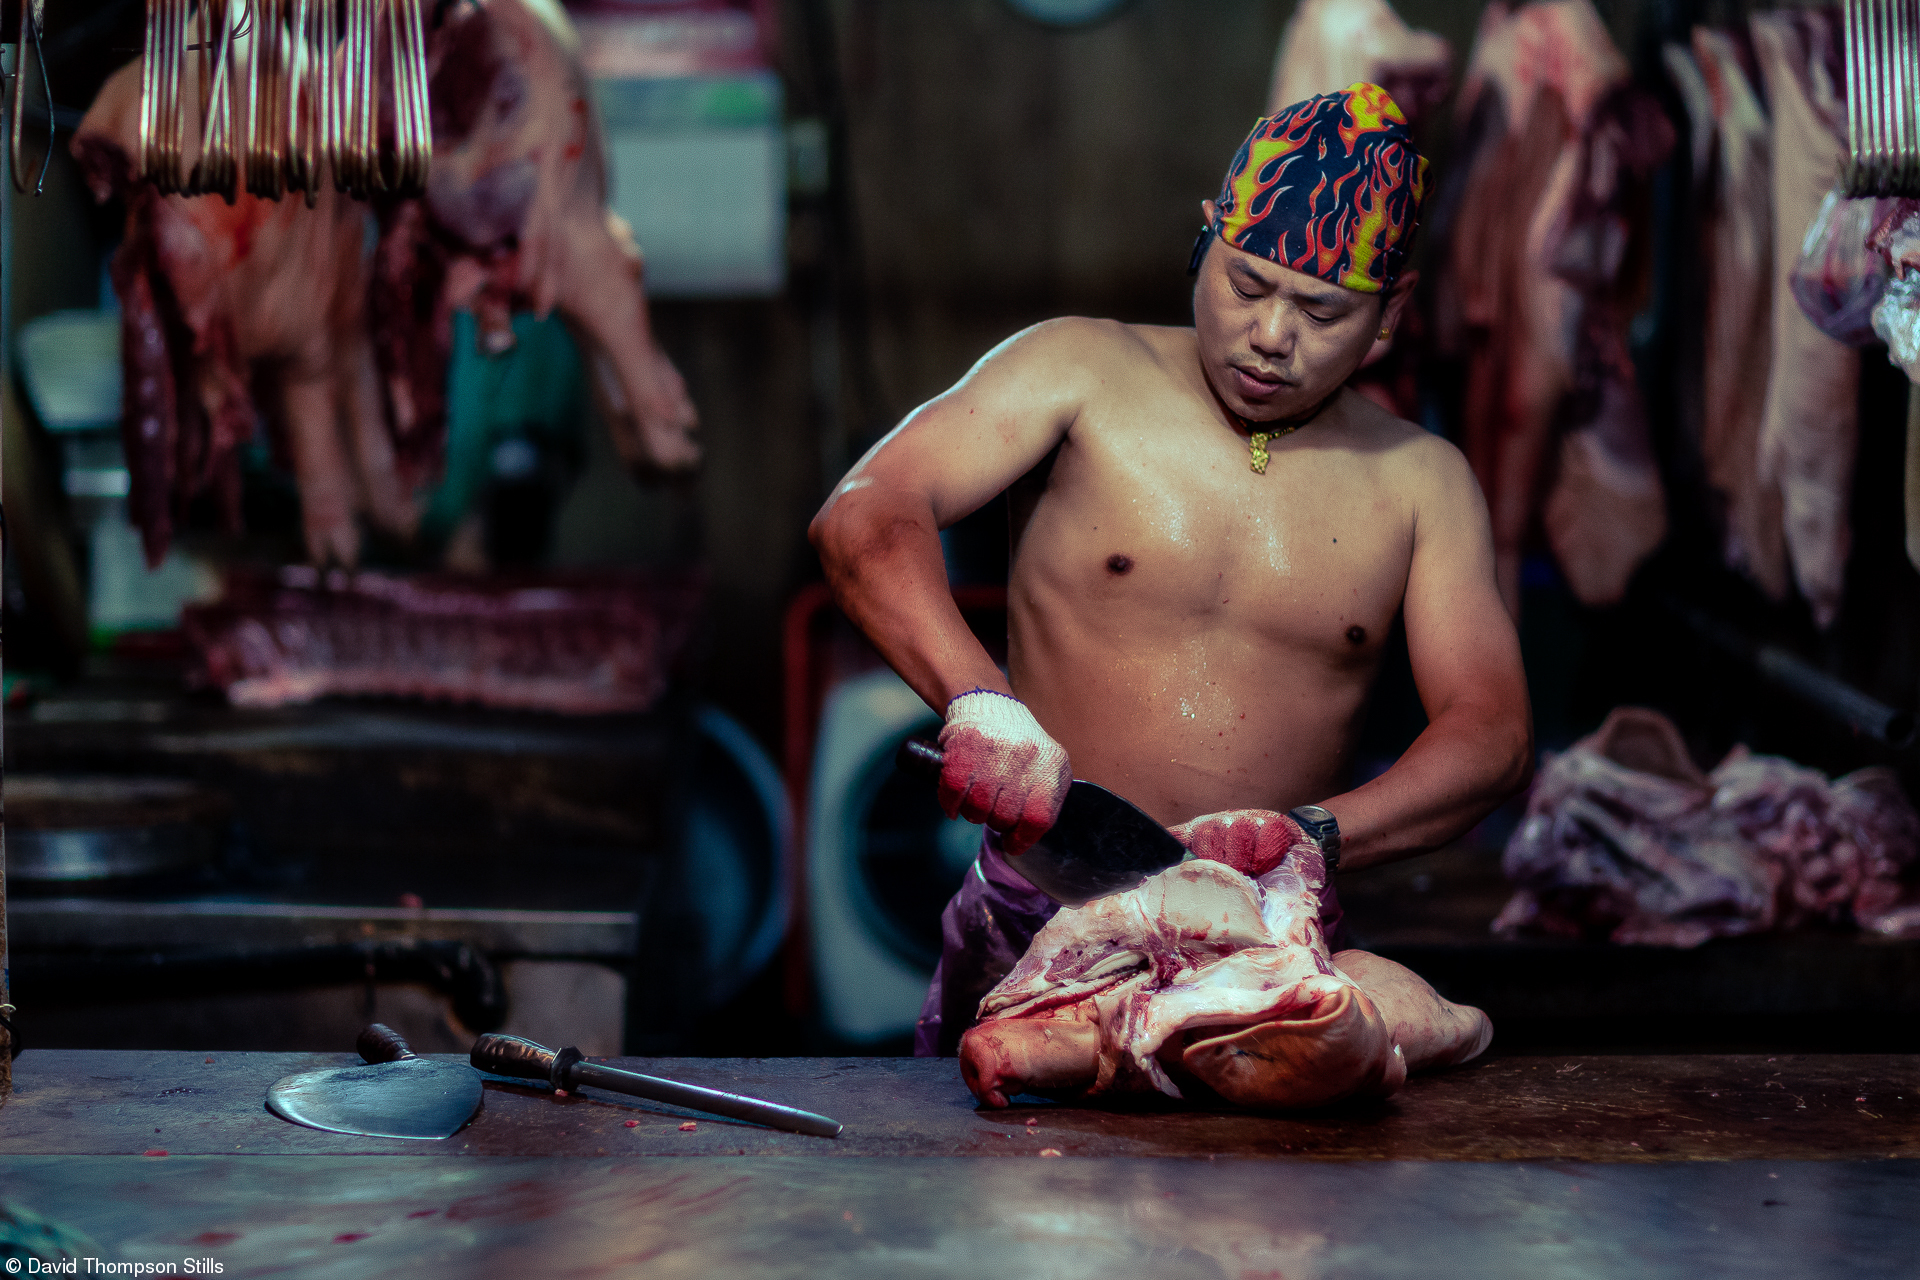 Food Photographer of the Year the Philip Harben Award for Food in Action© David Thompson, Taiwan